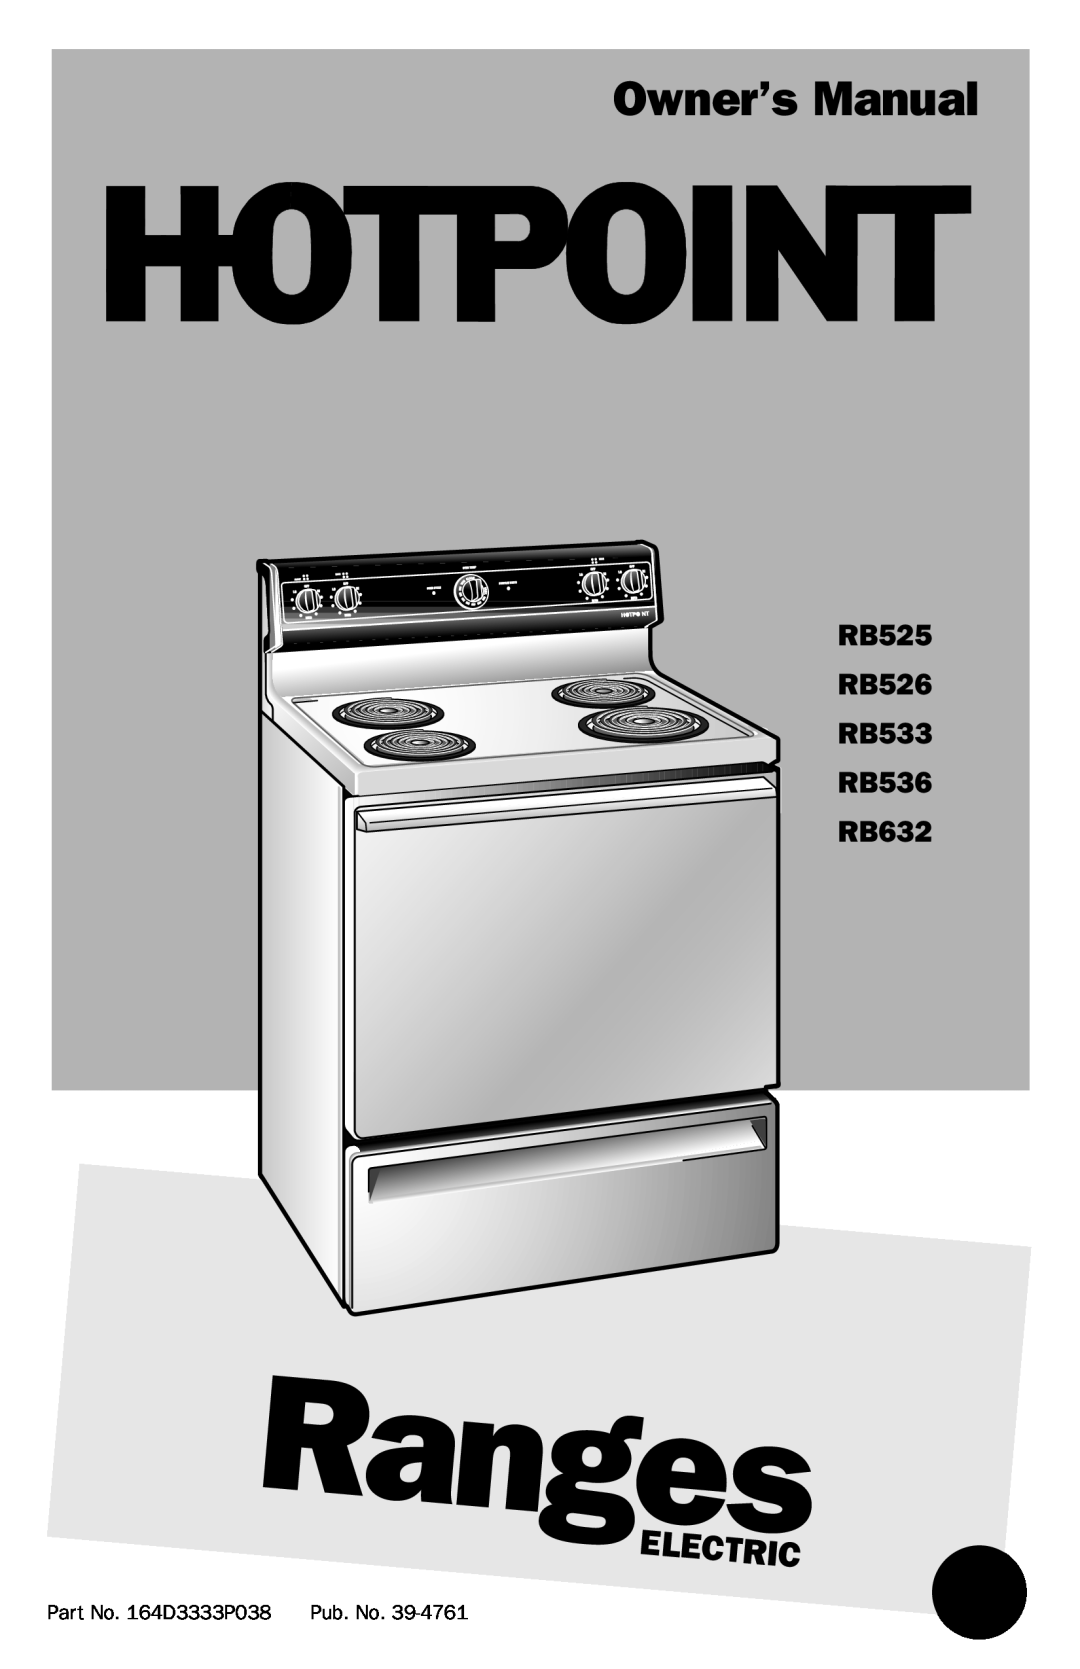 Hotpoint JBS27, JBS56, JBS07 owner manual GEAppliances.com, Operating Instructions, Troubleshooting Tips, Consumer Support 